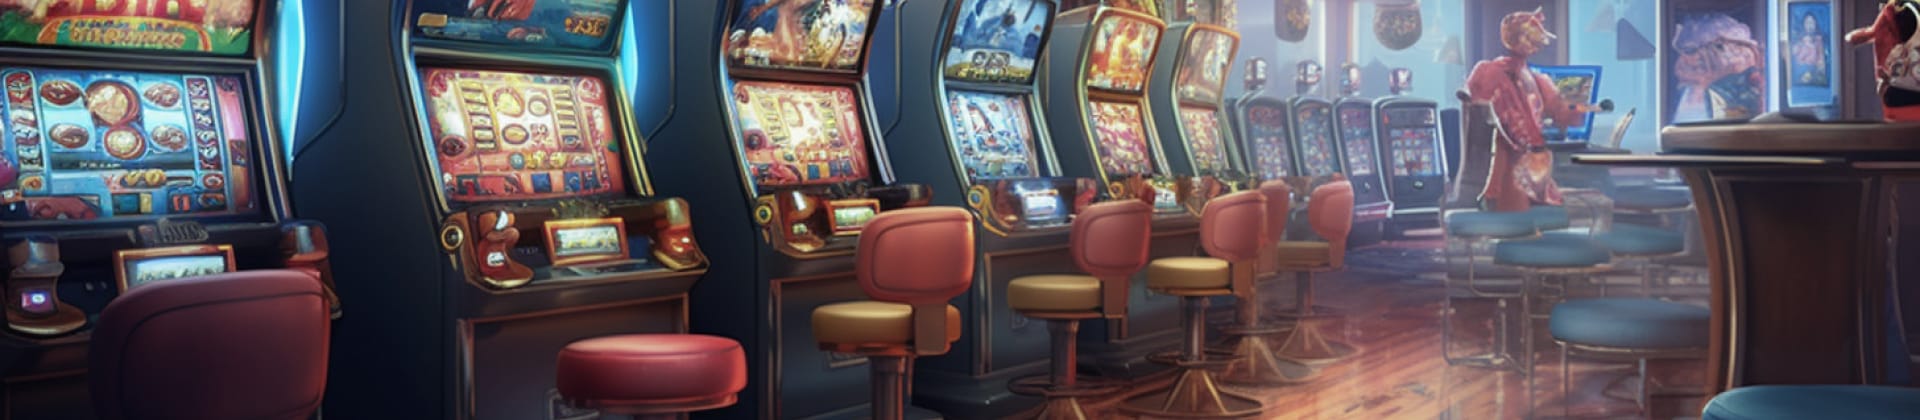 Casinos with cryptocurrency support